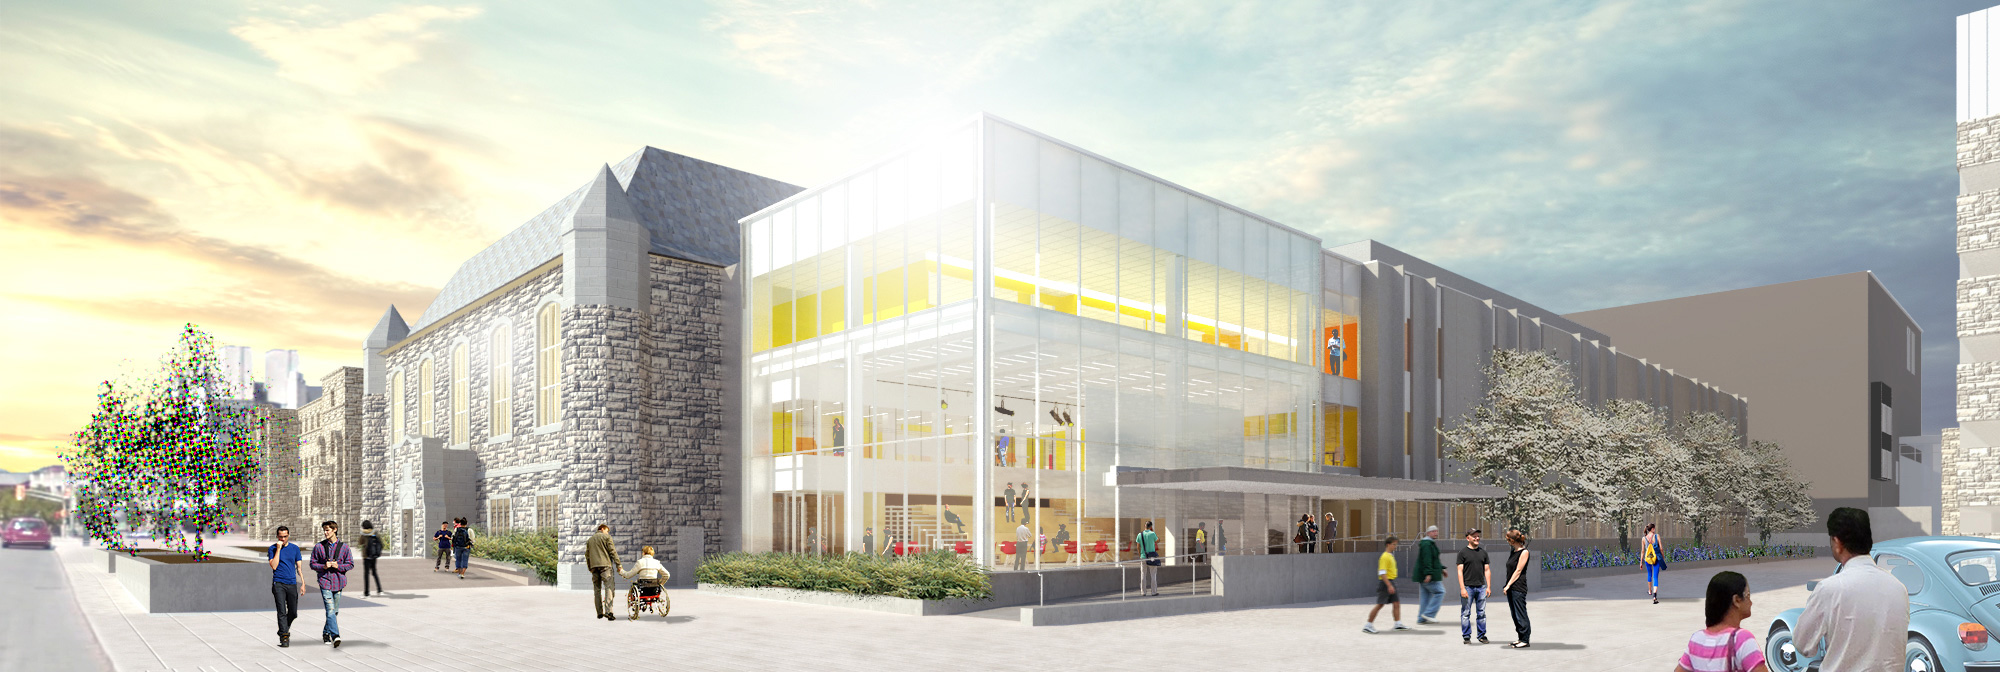 mocked up version of Mitchell Hall exterior